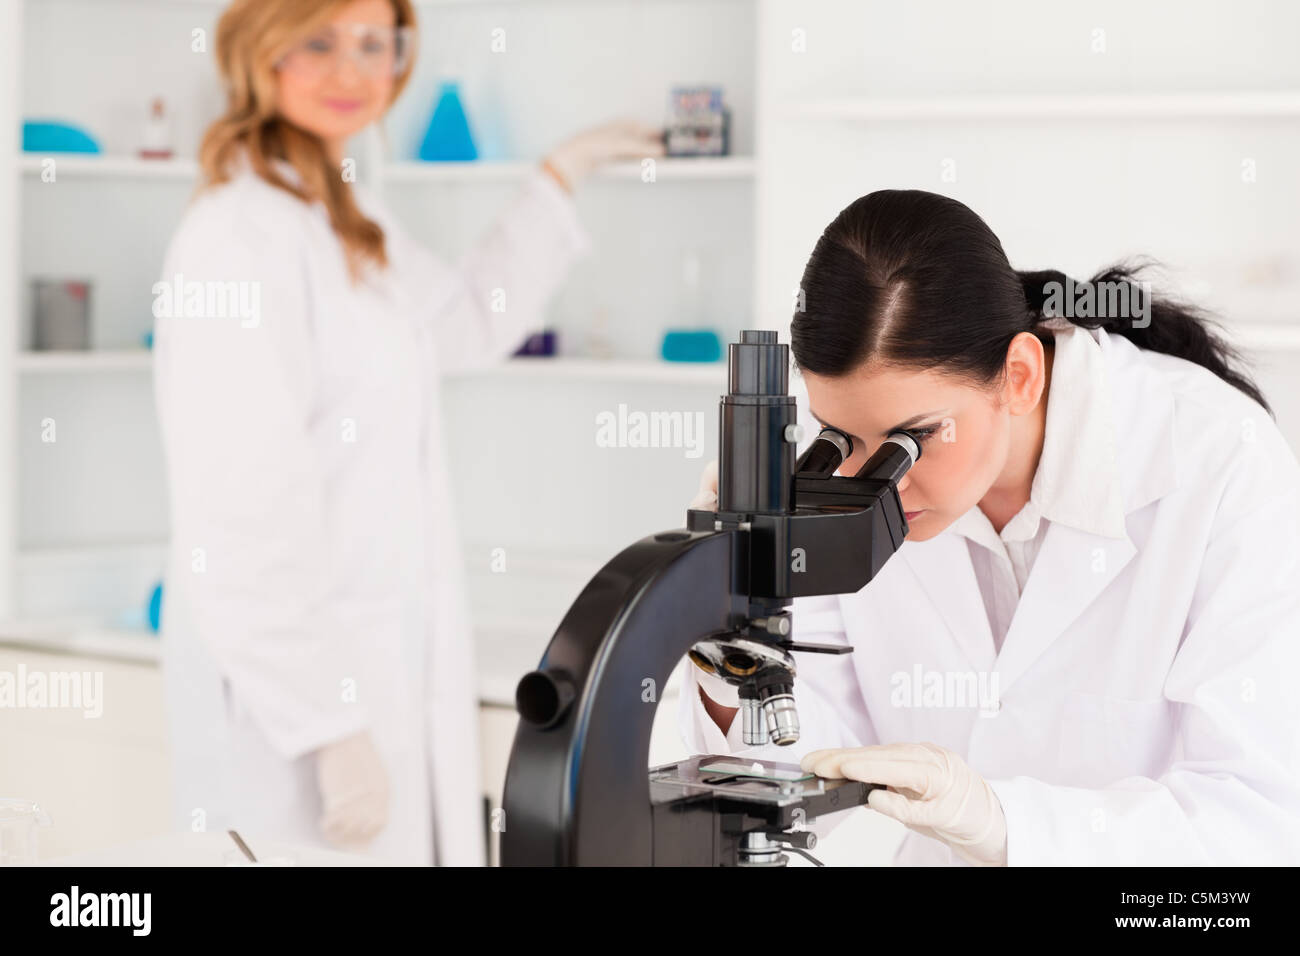 Two scientists working with a microscope Stock Photo